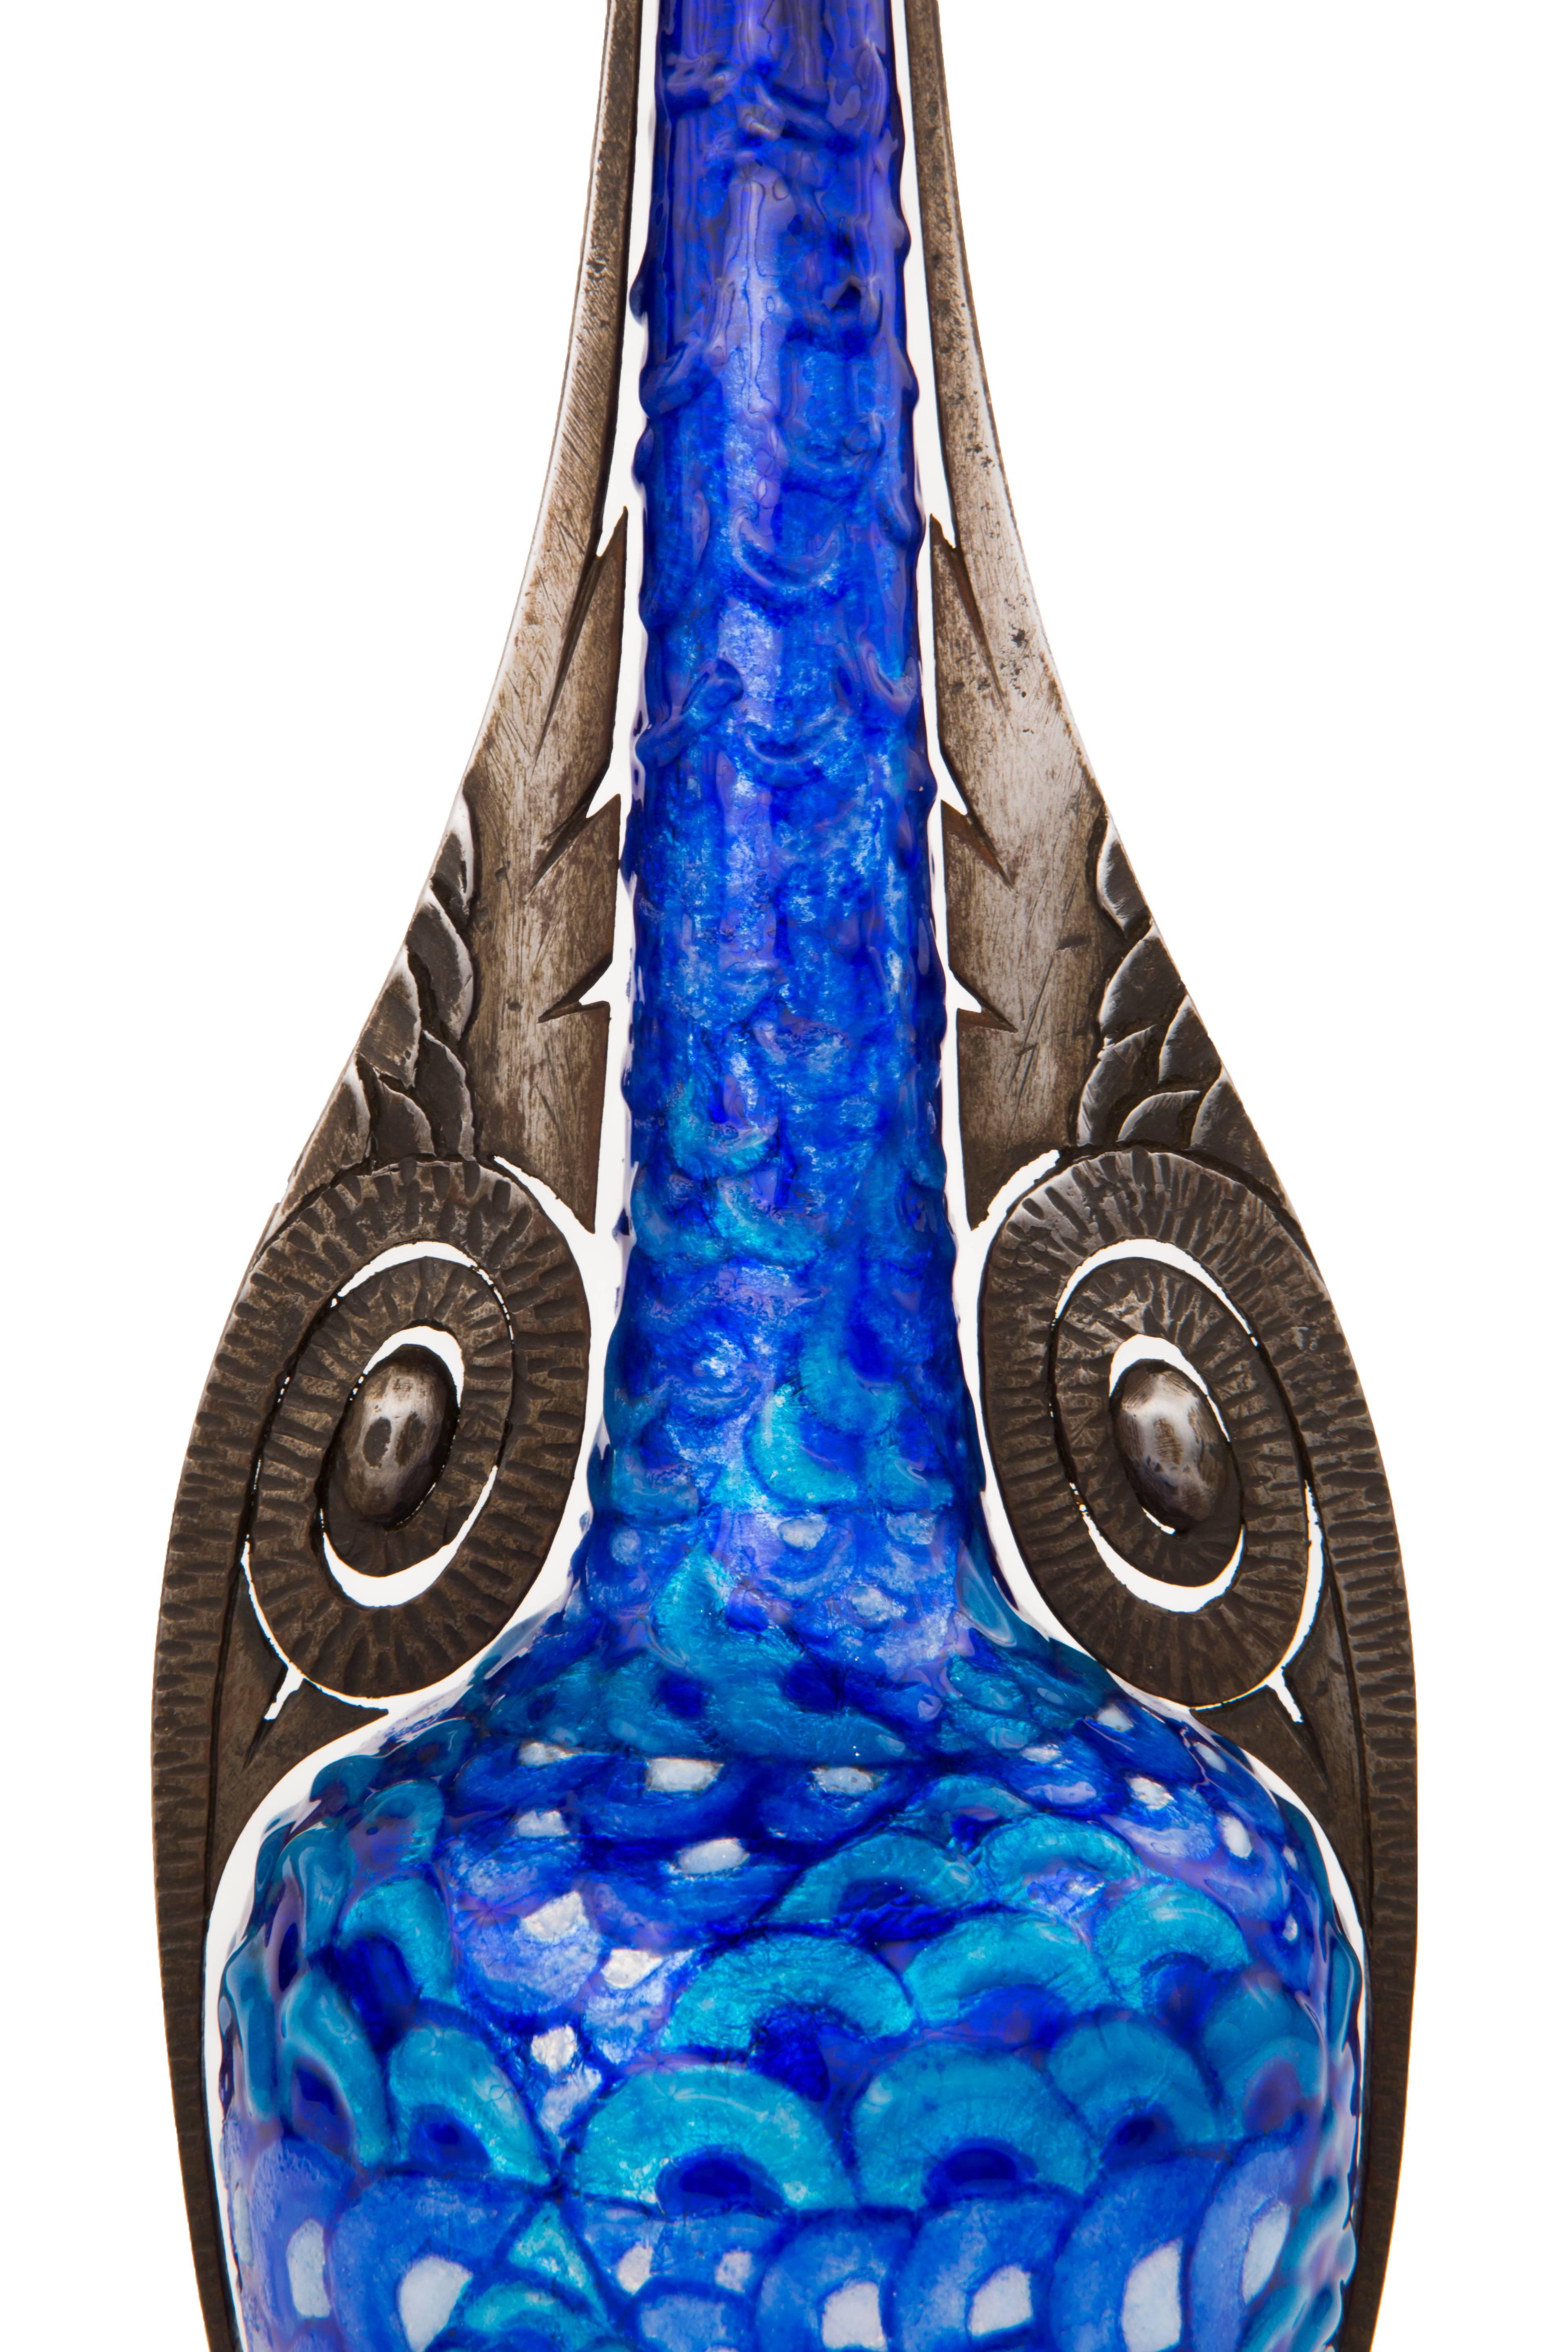 An extremely rare French Art Deco enameled laid on copper and wrought iron decorated vase by, Camille Fauré. The vase is decorated with an enameled geometric design in colors of blue, black, and white further set into a decorated hand forged wrought